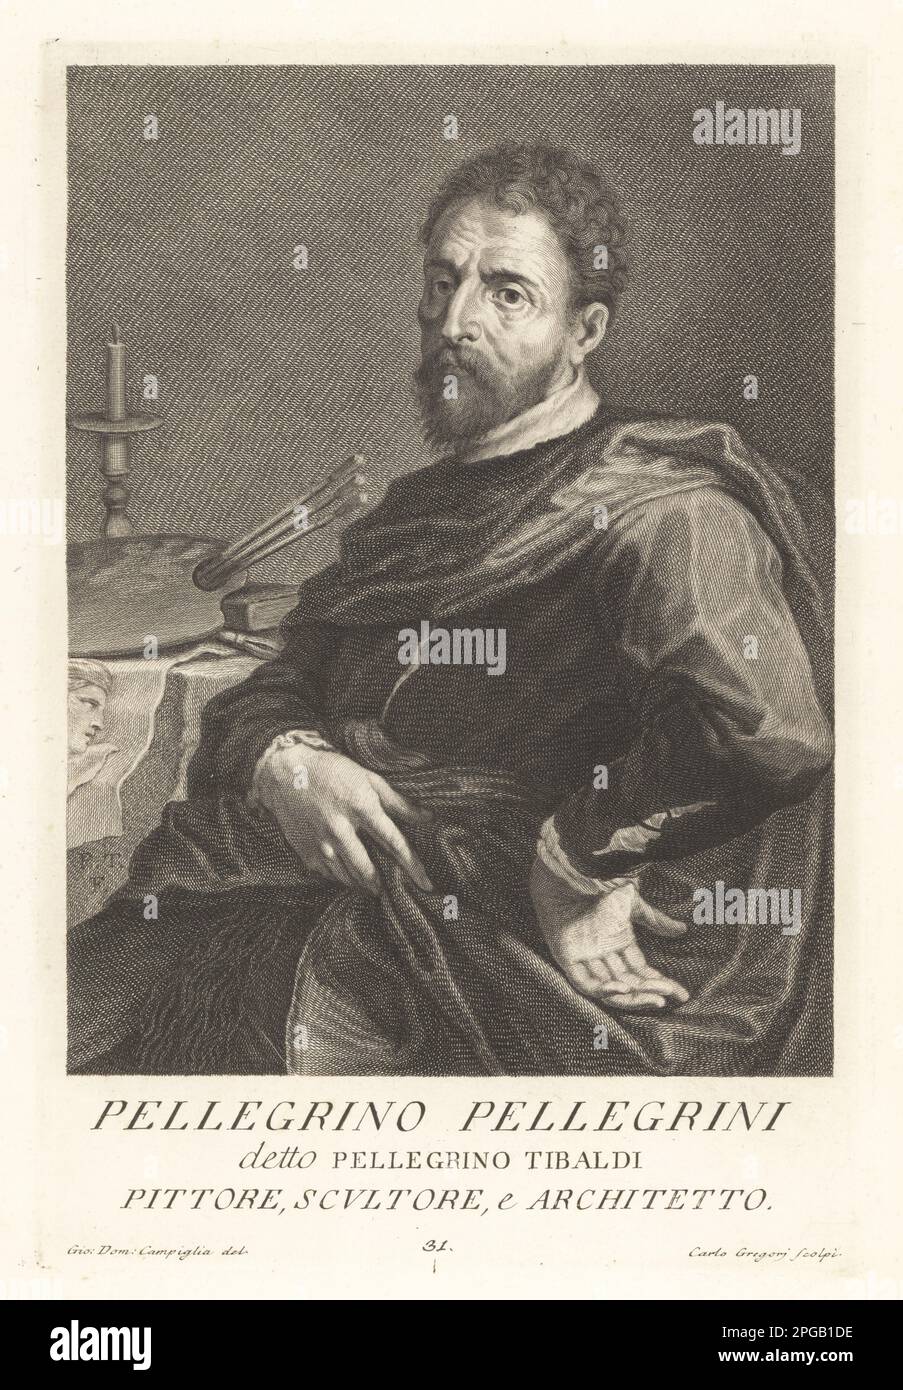 Pellegrino Tibaldi, Italian Renaissance painter, 1527-1592. Painted Cardinal Poggi's palace, the ceiling of Madrid Library, and became architect to the Duomo in Milan. Seated at a table with candle, palette and brushes, book and print. Pellegrino Pellegrini, Pittore, Scultore, e Architetto. Copperplate engraving by Carlo Gregori after Giovanni Domenico Campiglia after a self portrait by the artist from Francesco Moucke's Museo Florentino (Museum Florentinum), Serie di Ritratti de Pittori (Series of Portraits of Painters) stamperia Mouckiana, Florence, 1752-62. Stock Photo